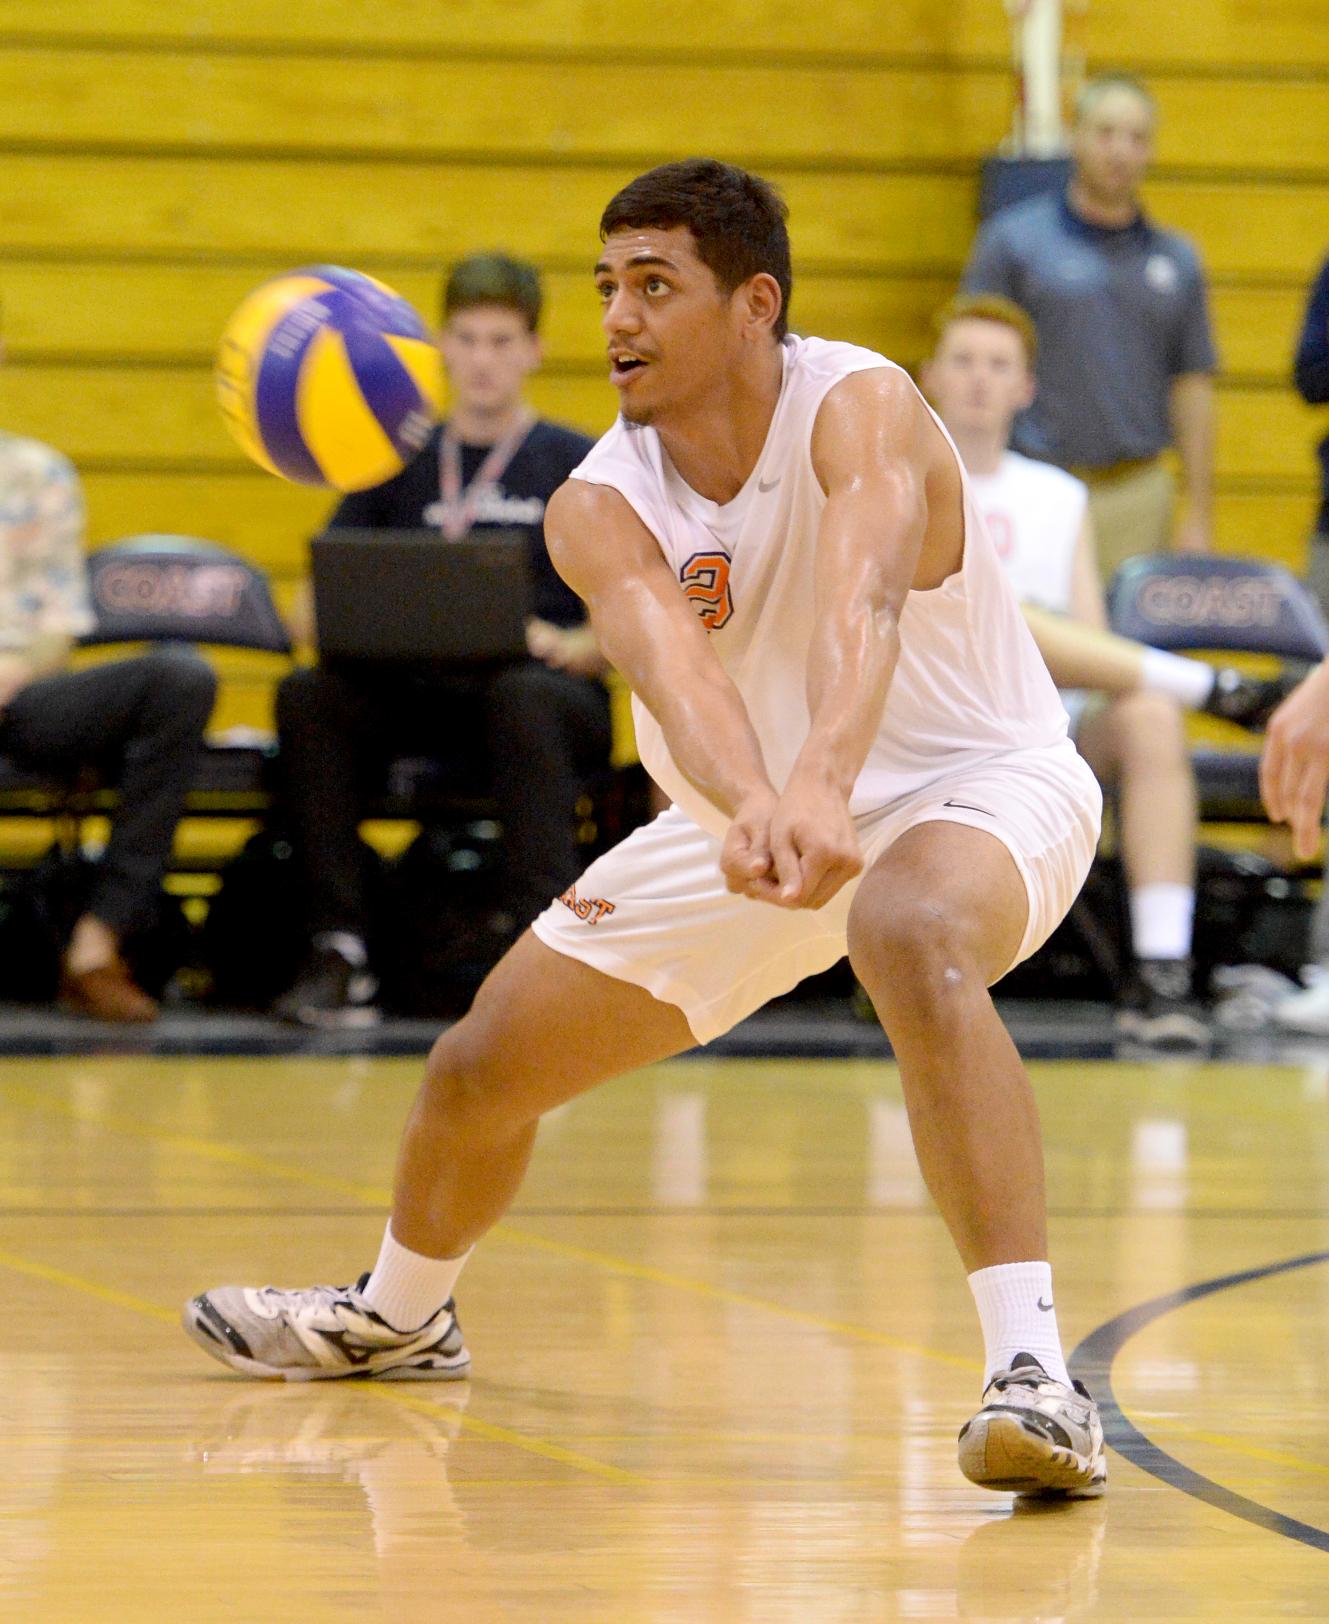 Pirates grind out three-set sweep over El Camino